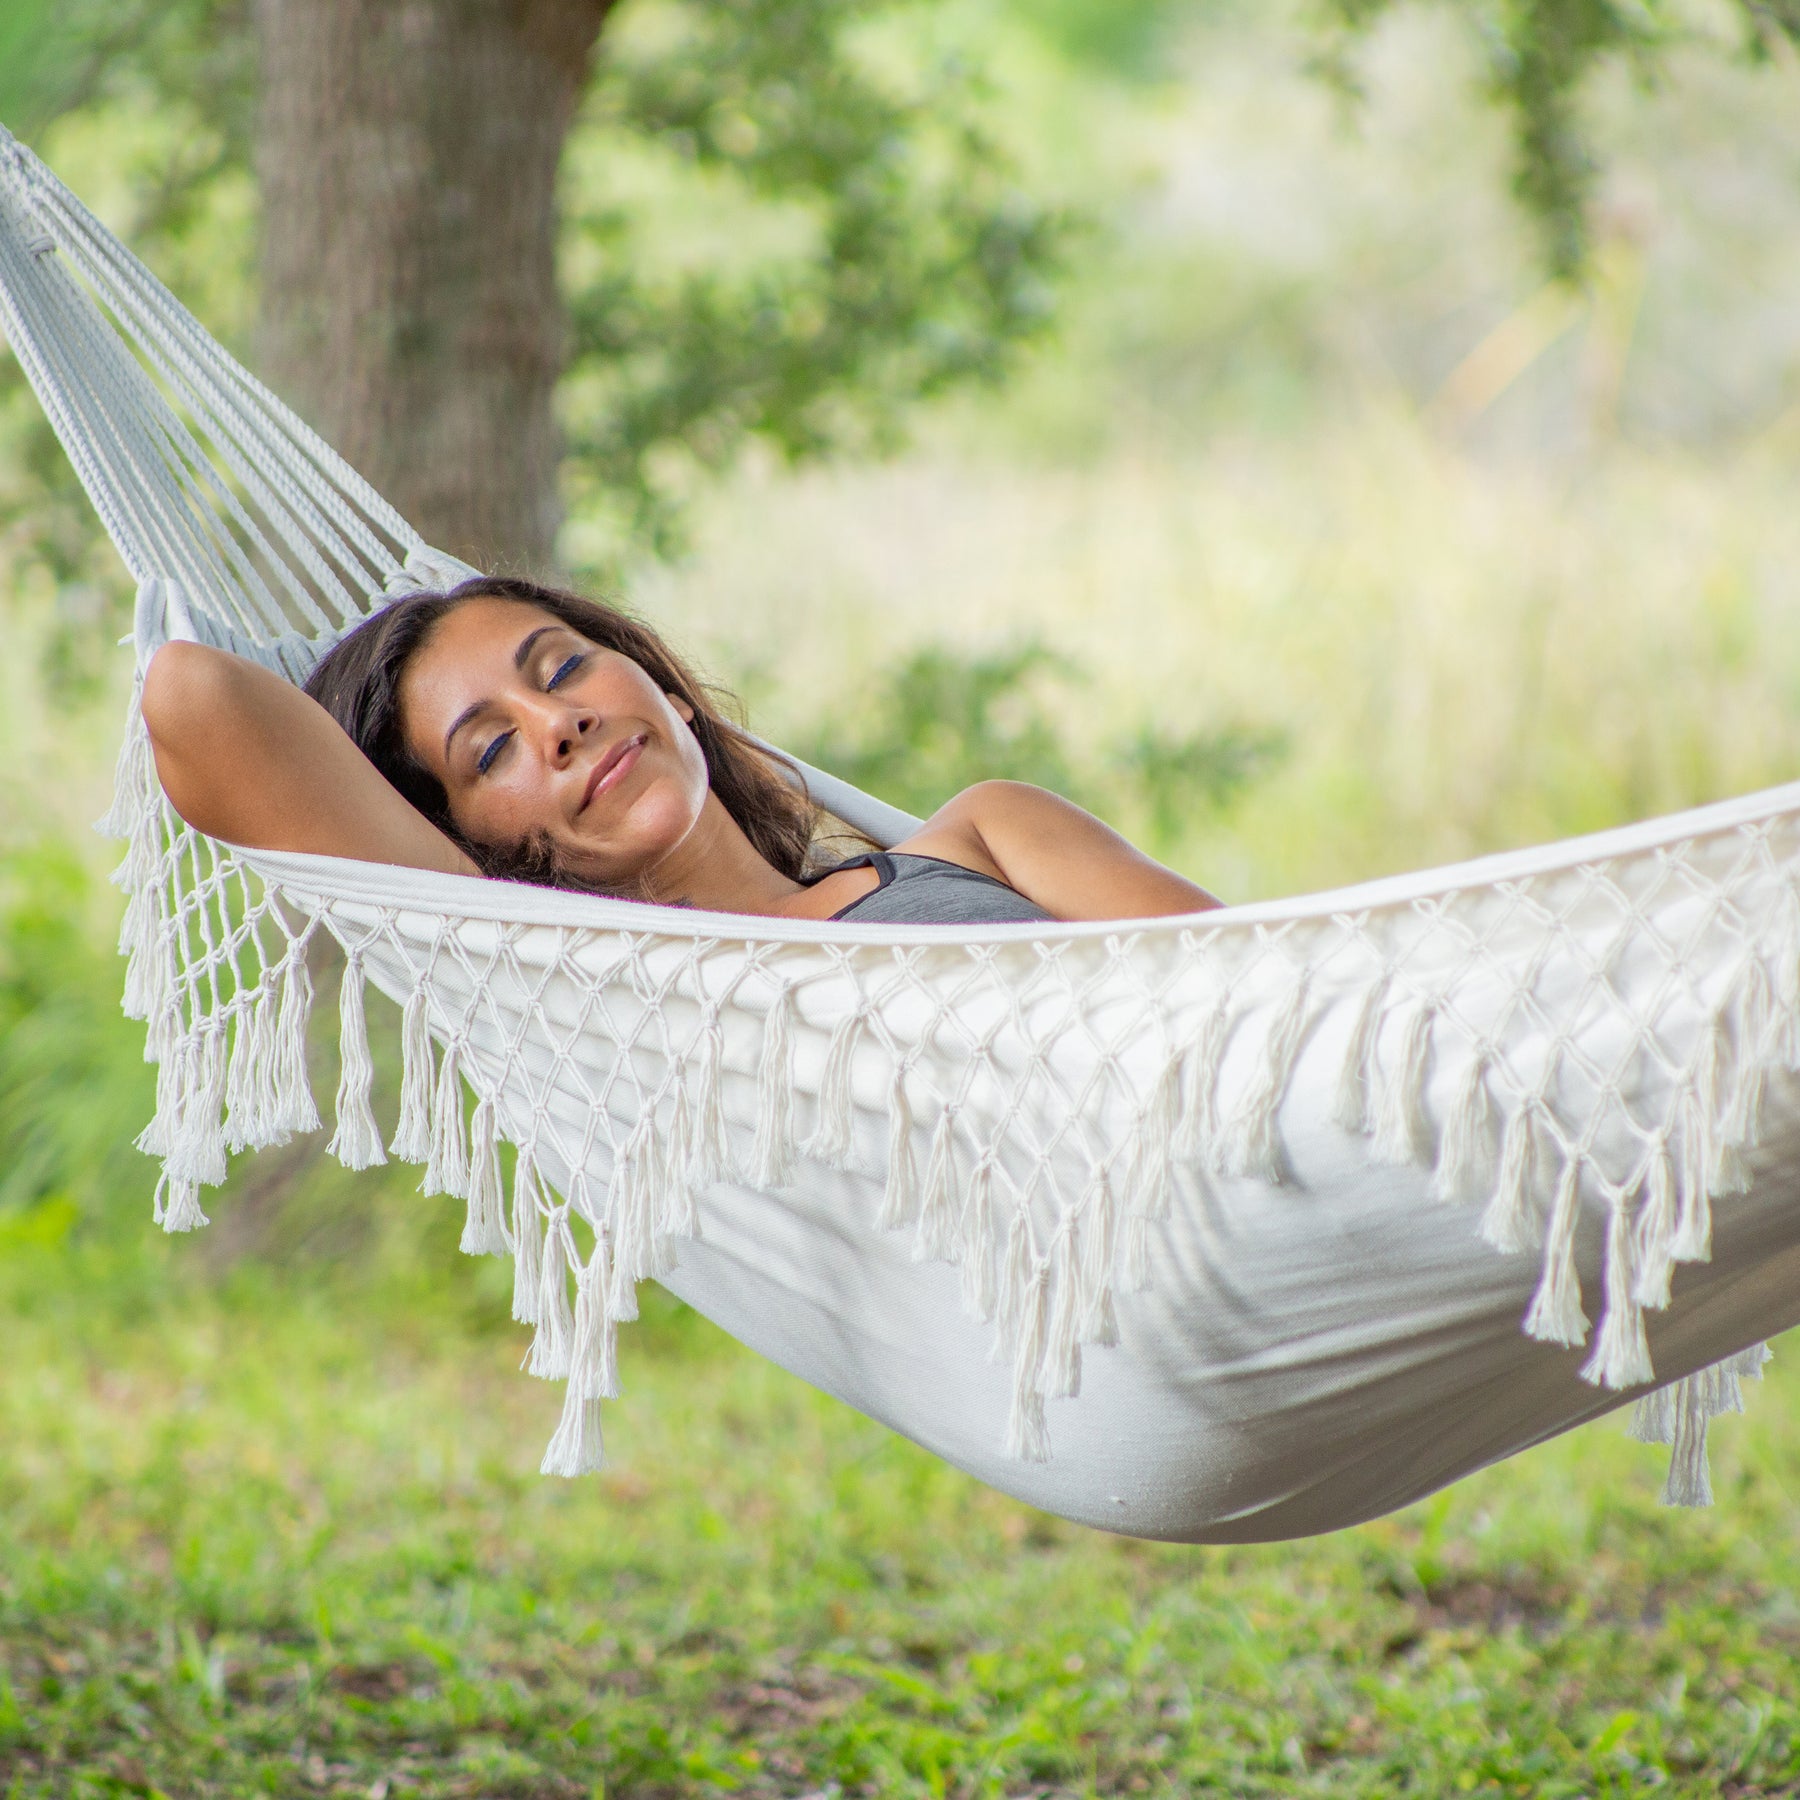 Woman relaxing in a Bliss Hammocks fringed hammock outside with nature around her.